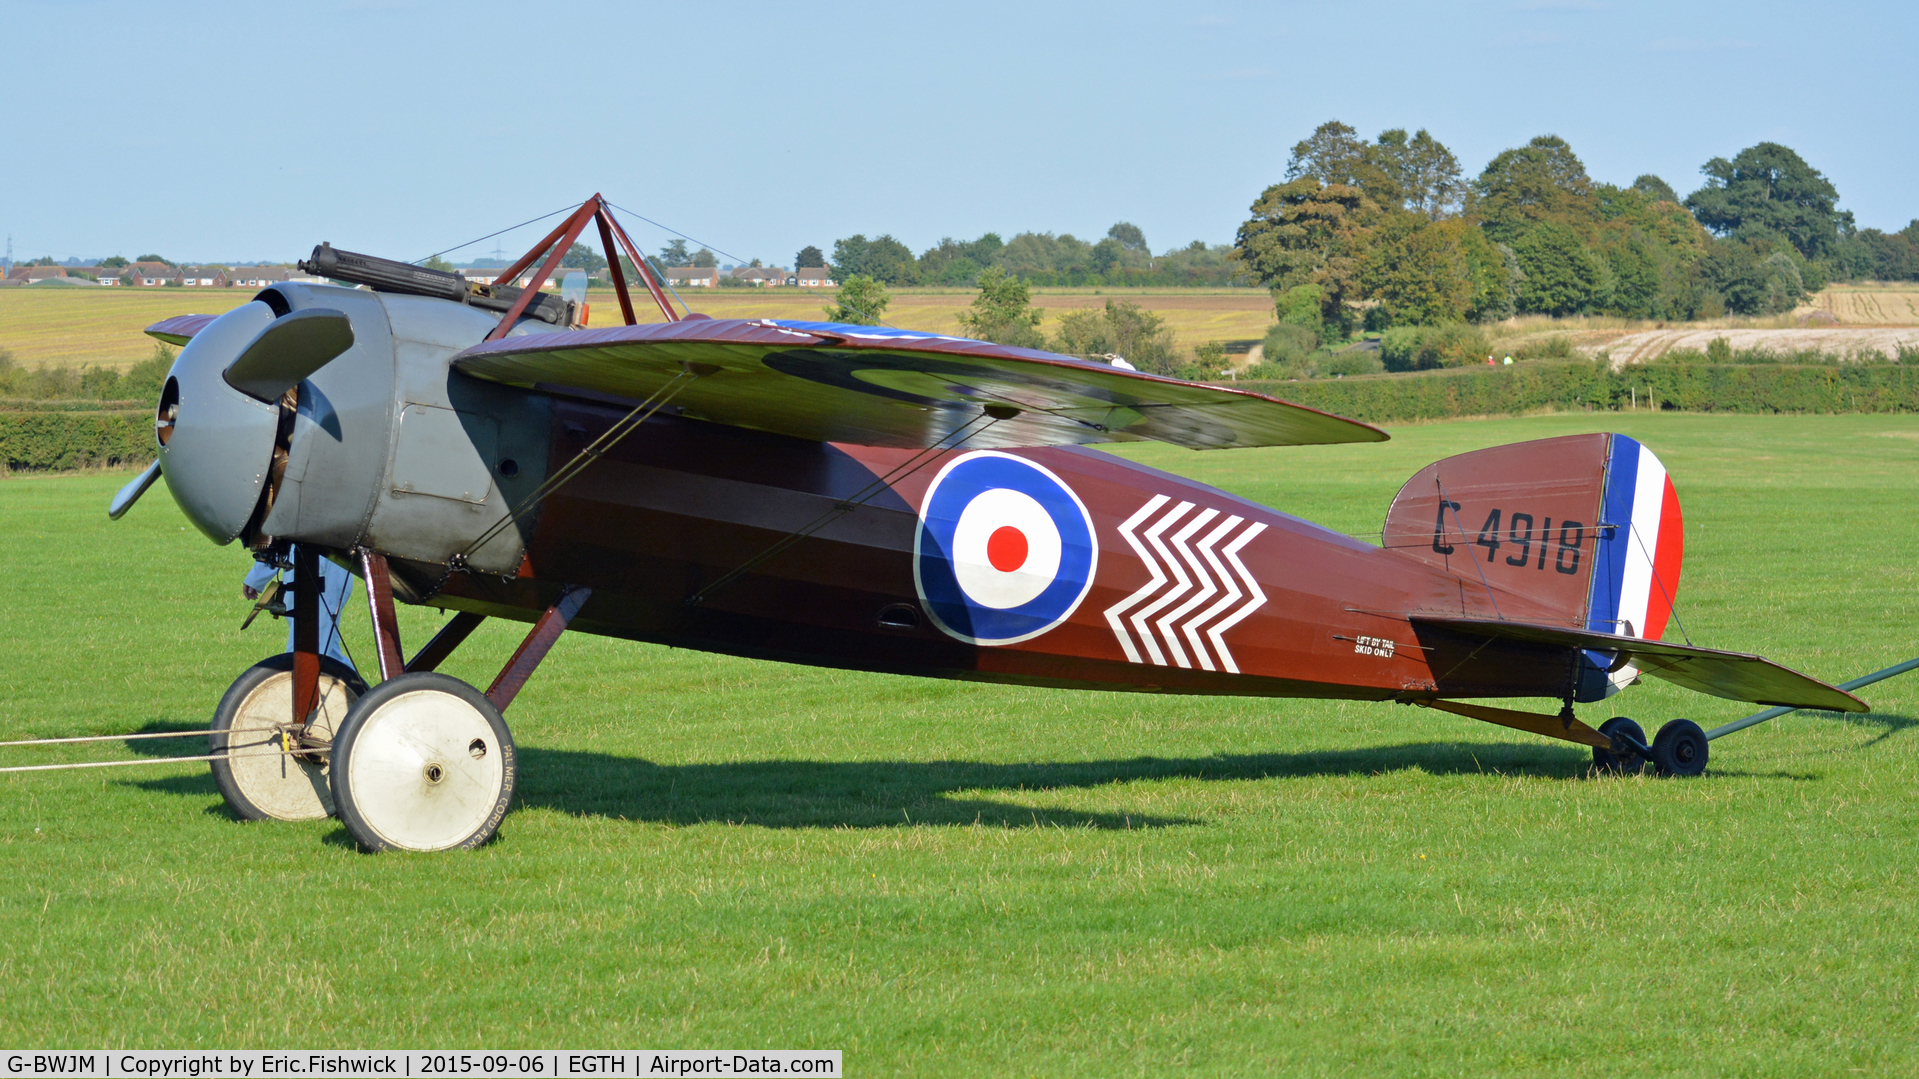 G-BWJM, 1981 Bristol M-1C Replica C/N NAW-2, 1. C-4918 at The Shuttleworth Pagent Airshow, Sep. 2015.